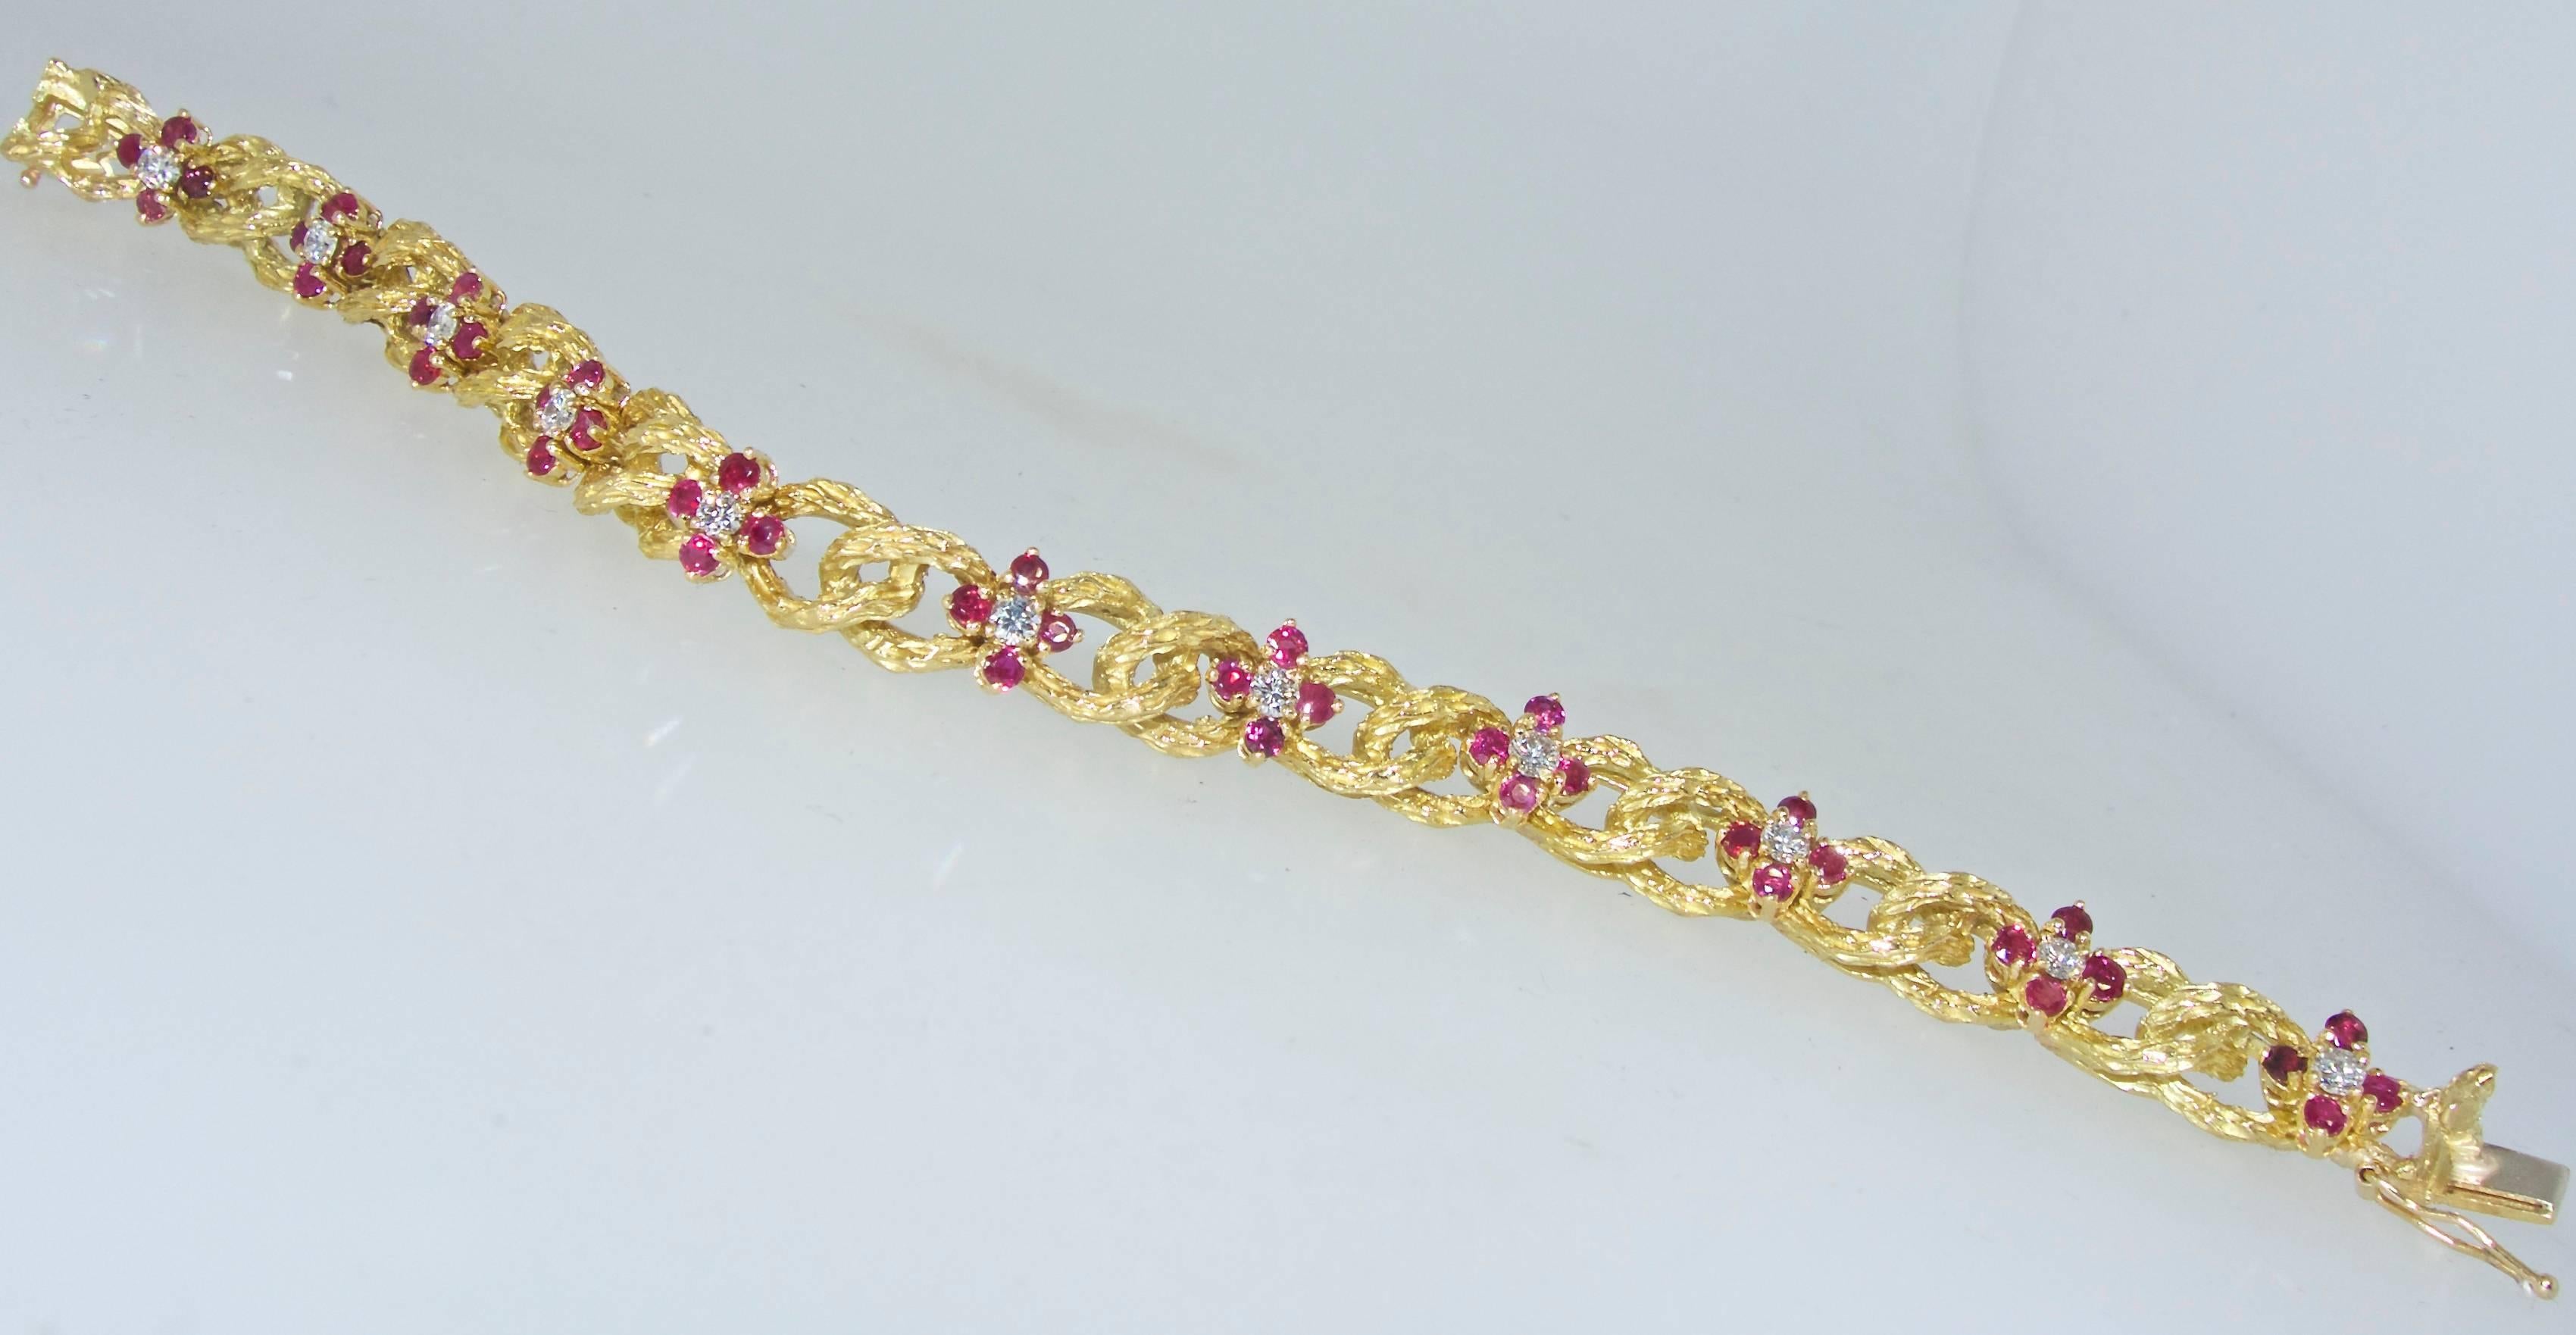  18K yellow gold bracelet with 44 natural fine Rubies, weighing totally approximately 1.32 cts. and 11 fine white diamonds weighing totally approximately .88 cts.  This contemporary charming flower motif bracelet is 7.25 inches long and very well